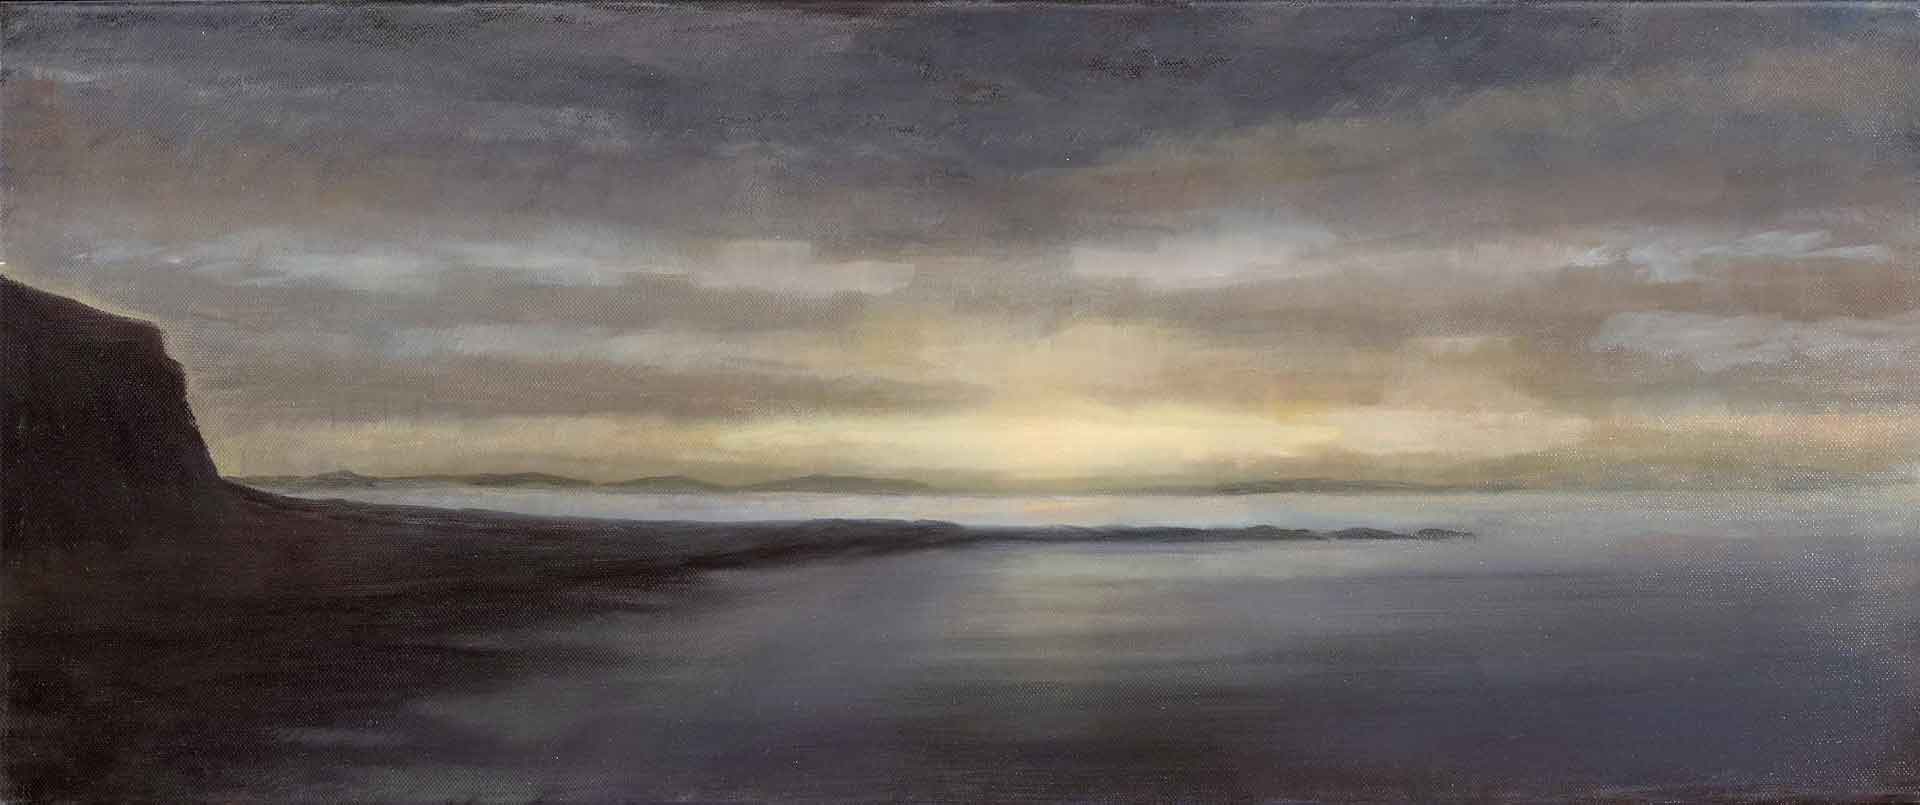 Tiree From Mull. Landscape Painting by Victoria Orr Ewing